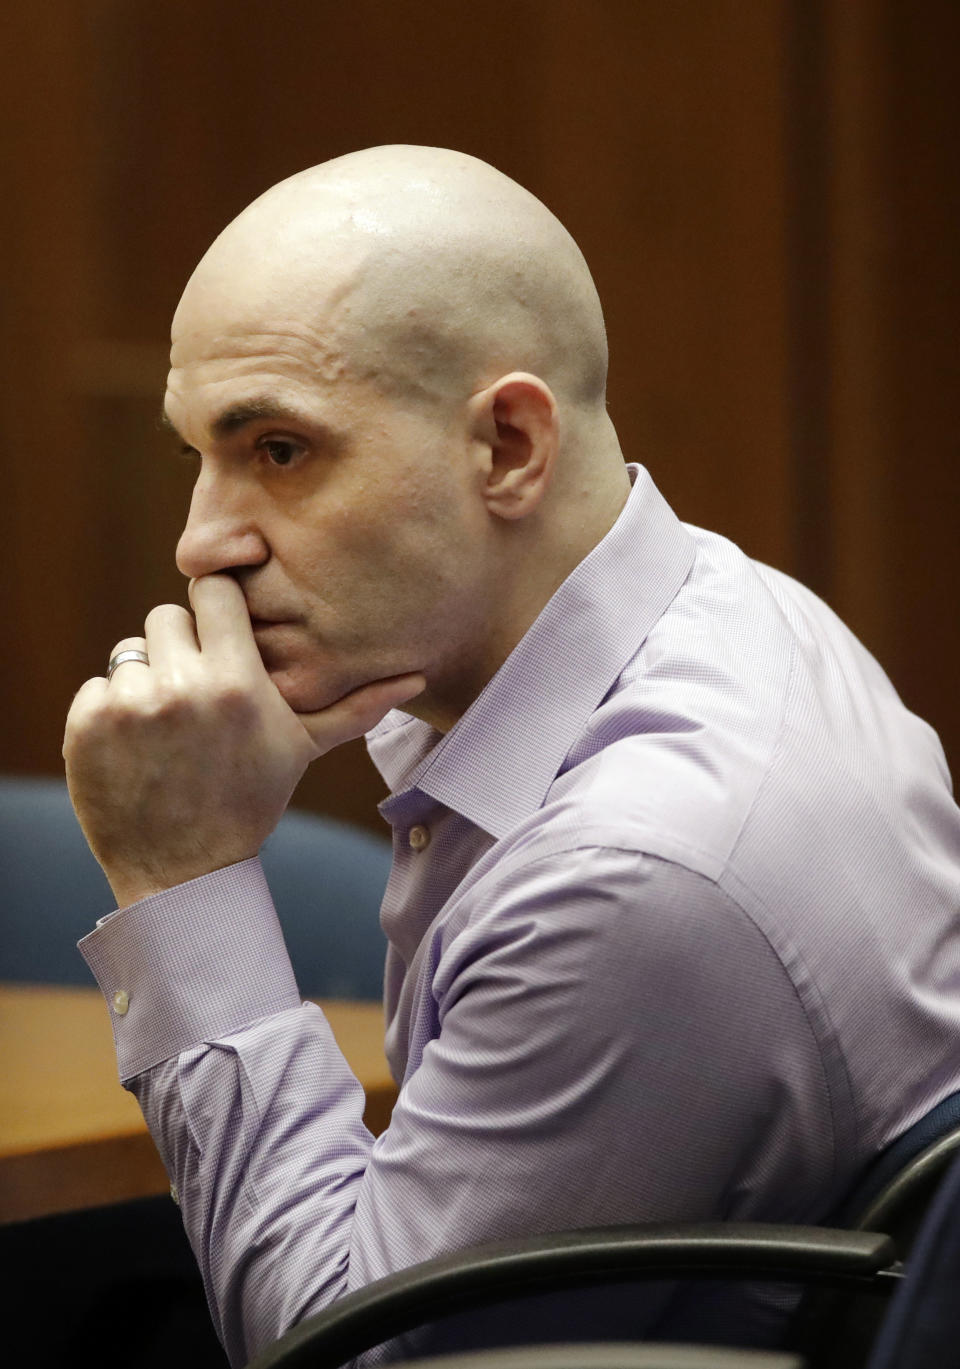 Michael Gargiulo listens to his attorney's closing arguments during the trial of People vs. Michael Gargiulo Wednesday, Aug. 7, 2019, in Los Angeles. Closing arguments continued Wednesday in the trial of the air conditioning repairman charged with killing two Southern California women and attempting to kill a third. (AP Photo/Marcio Jose Sanchez, Pool)